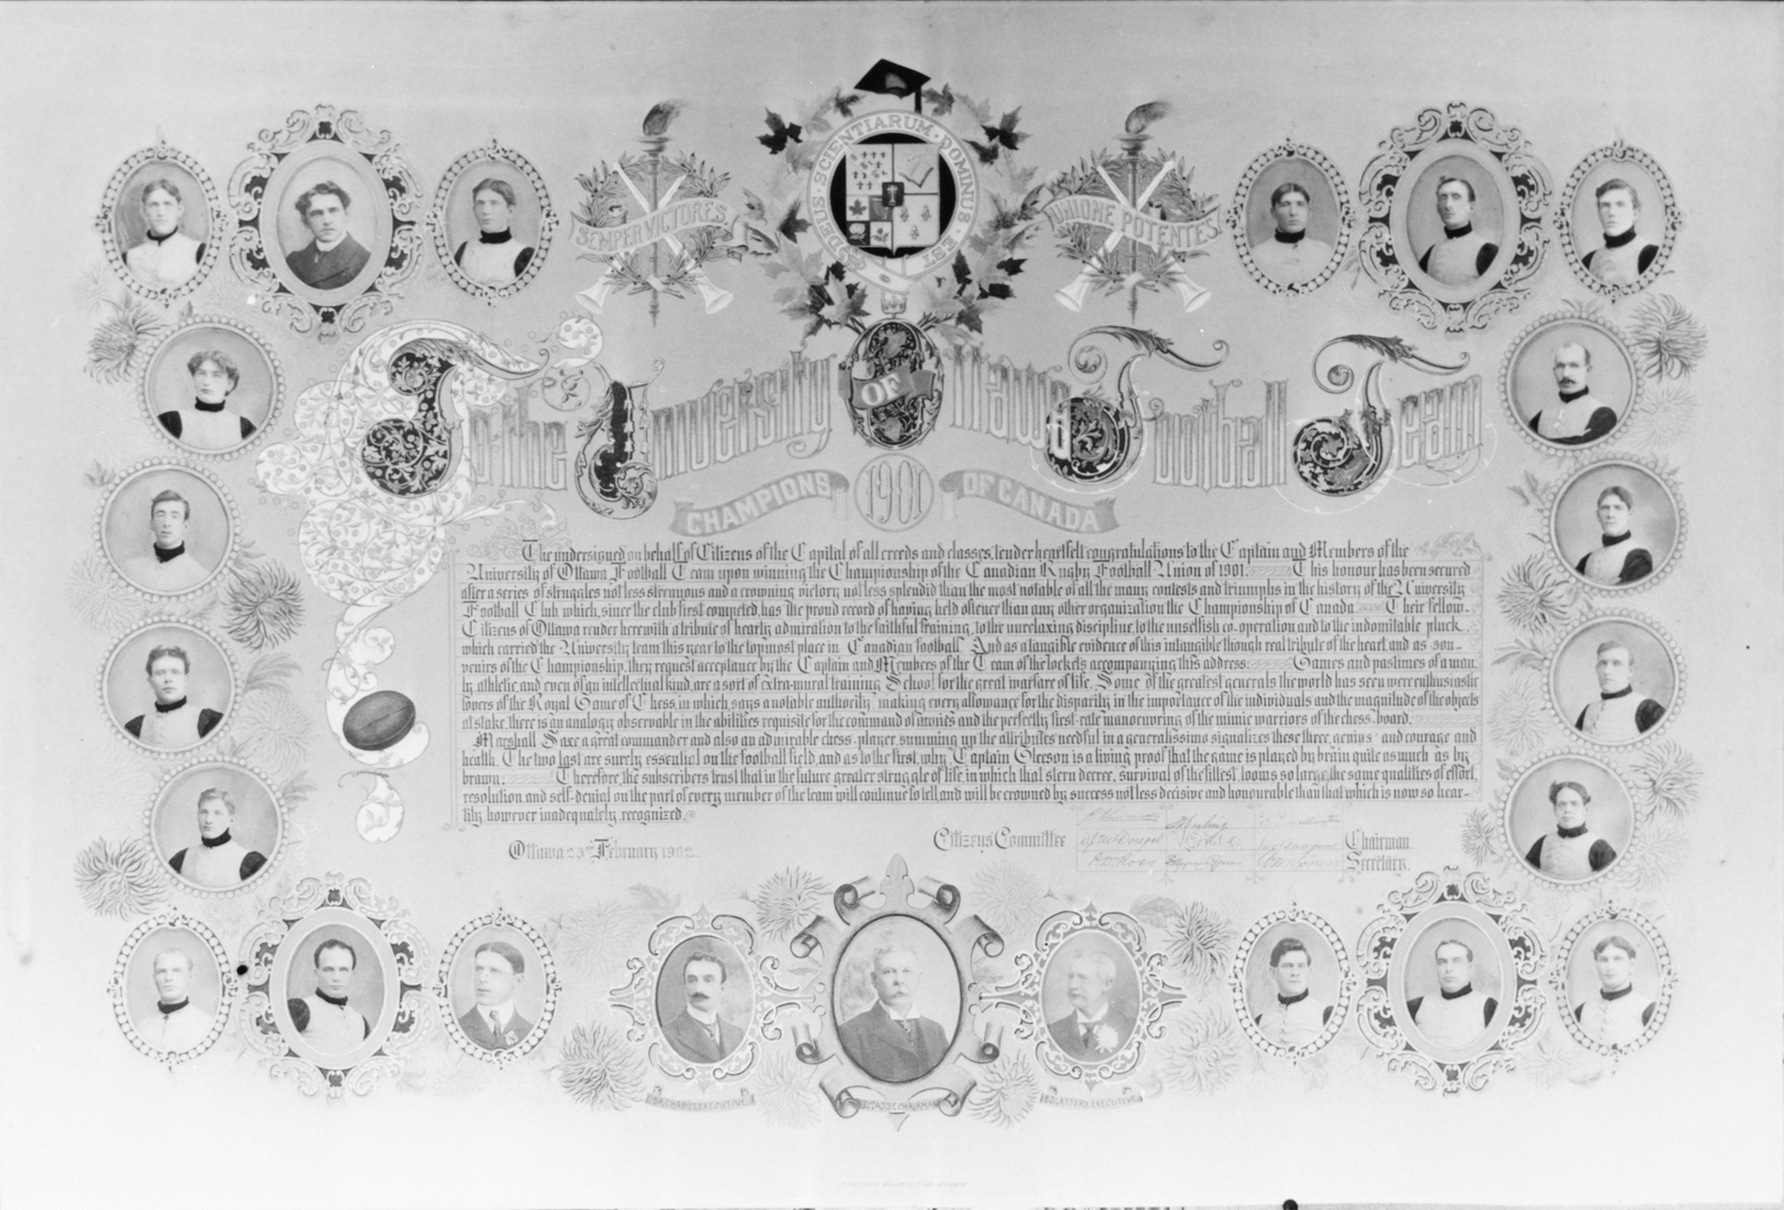 A document which has decorative frames around head and shoulder photos of members of the football team, the university crest, and a rugby football. The title reads "to the university of Ottawa Football Team, champions of Canada 1901".